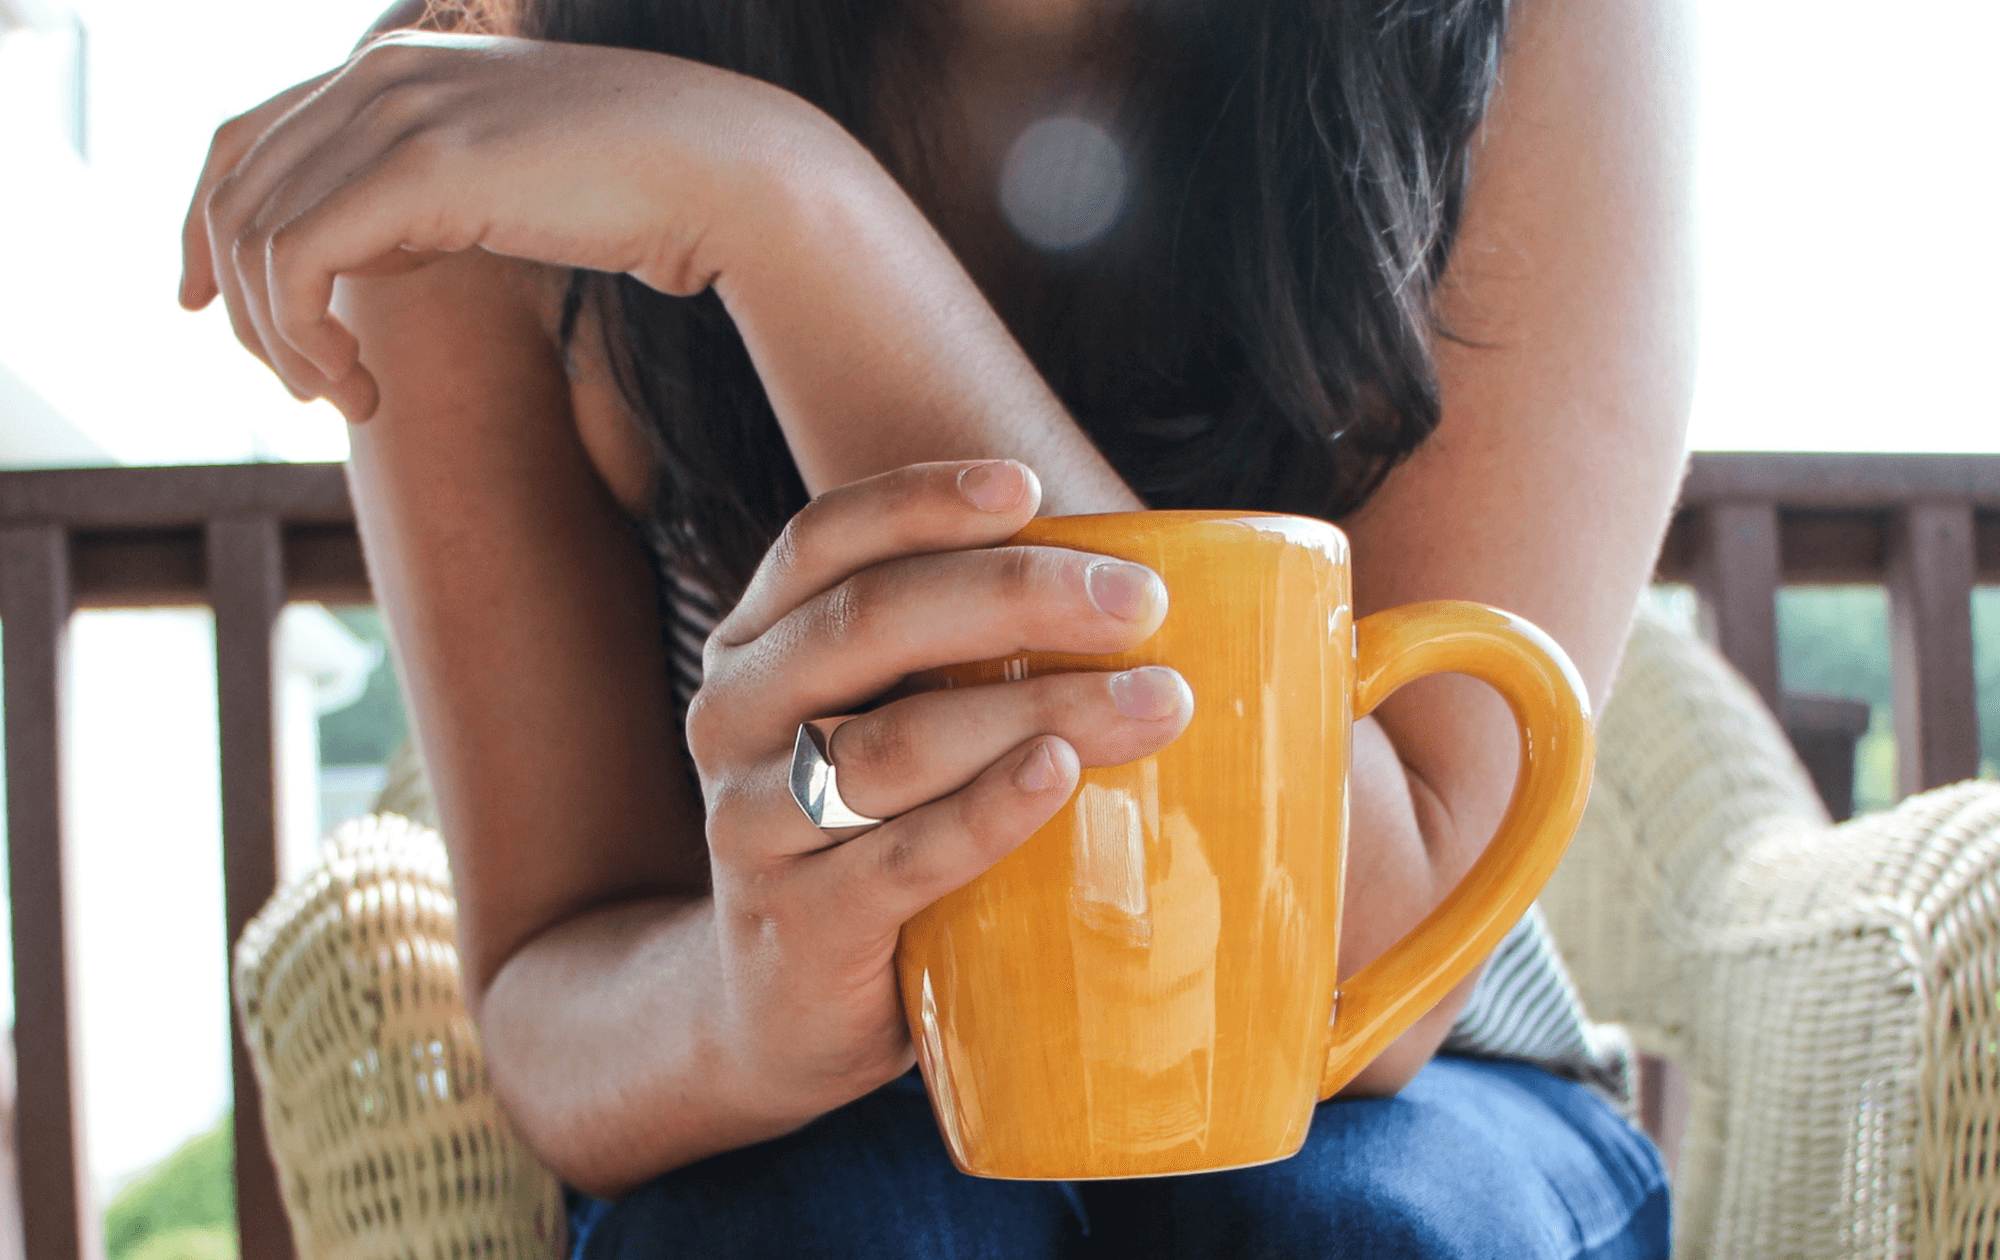 Girl holding ornage cup of coffee